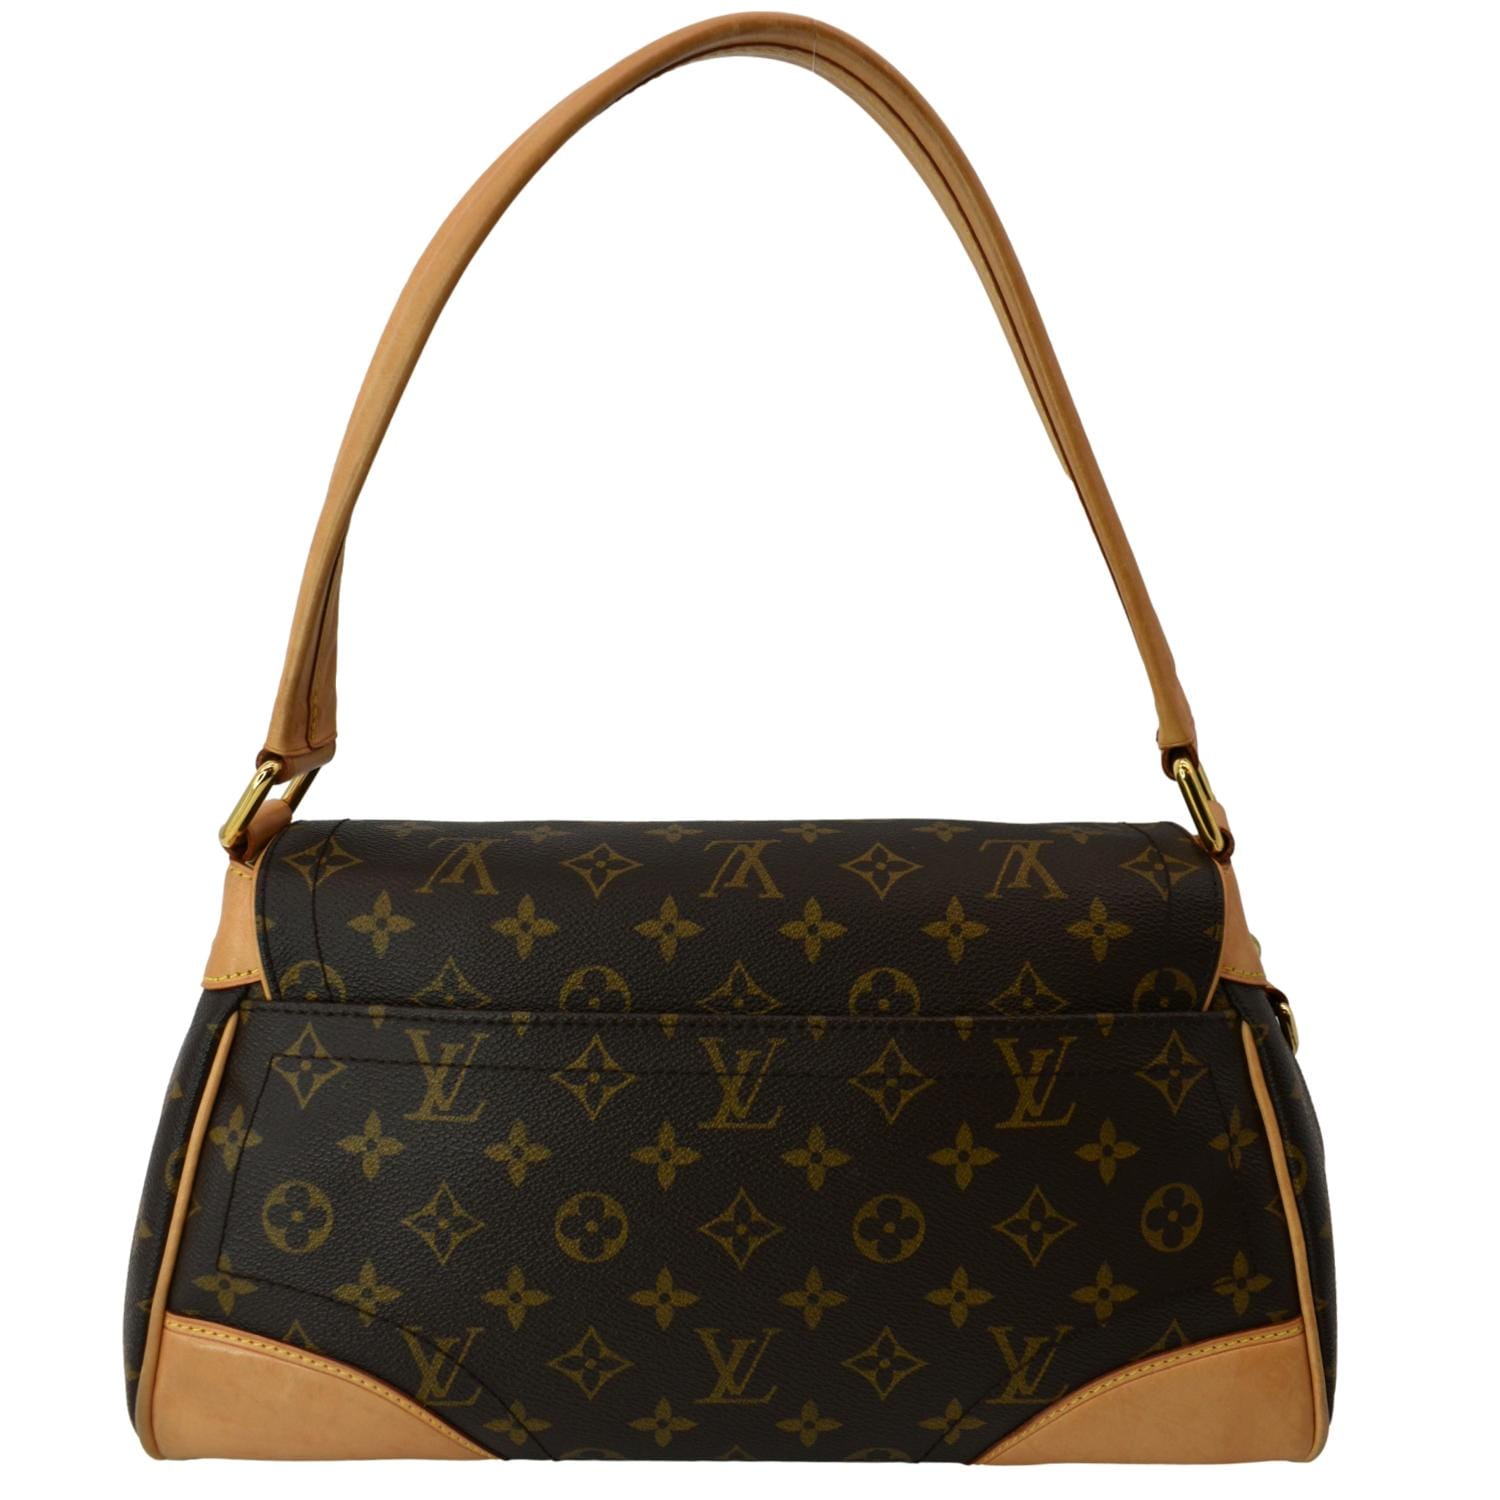 Louis Vuitton Beverly Pouch Monogram Canvas and Natural Leather